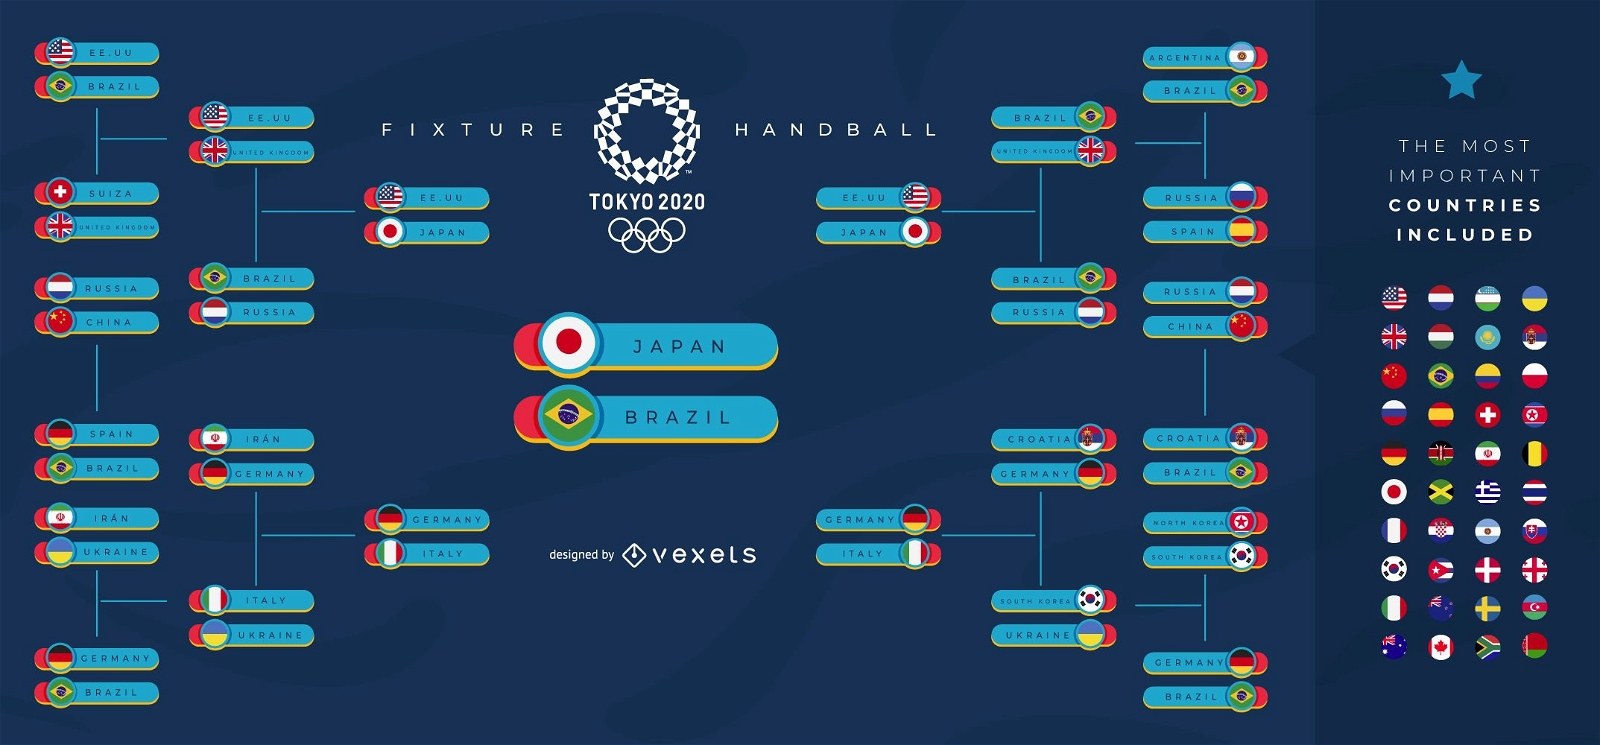 Olympic Sports Tournament Fixture Template Design